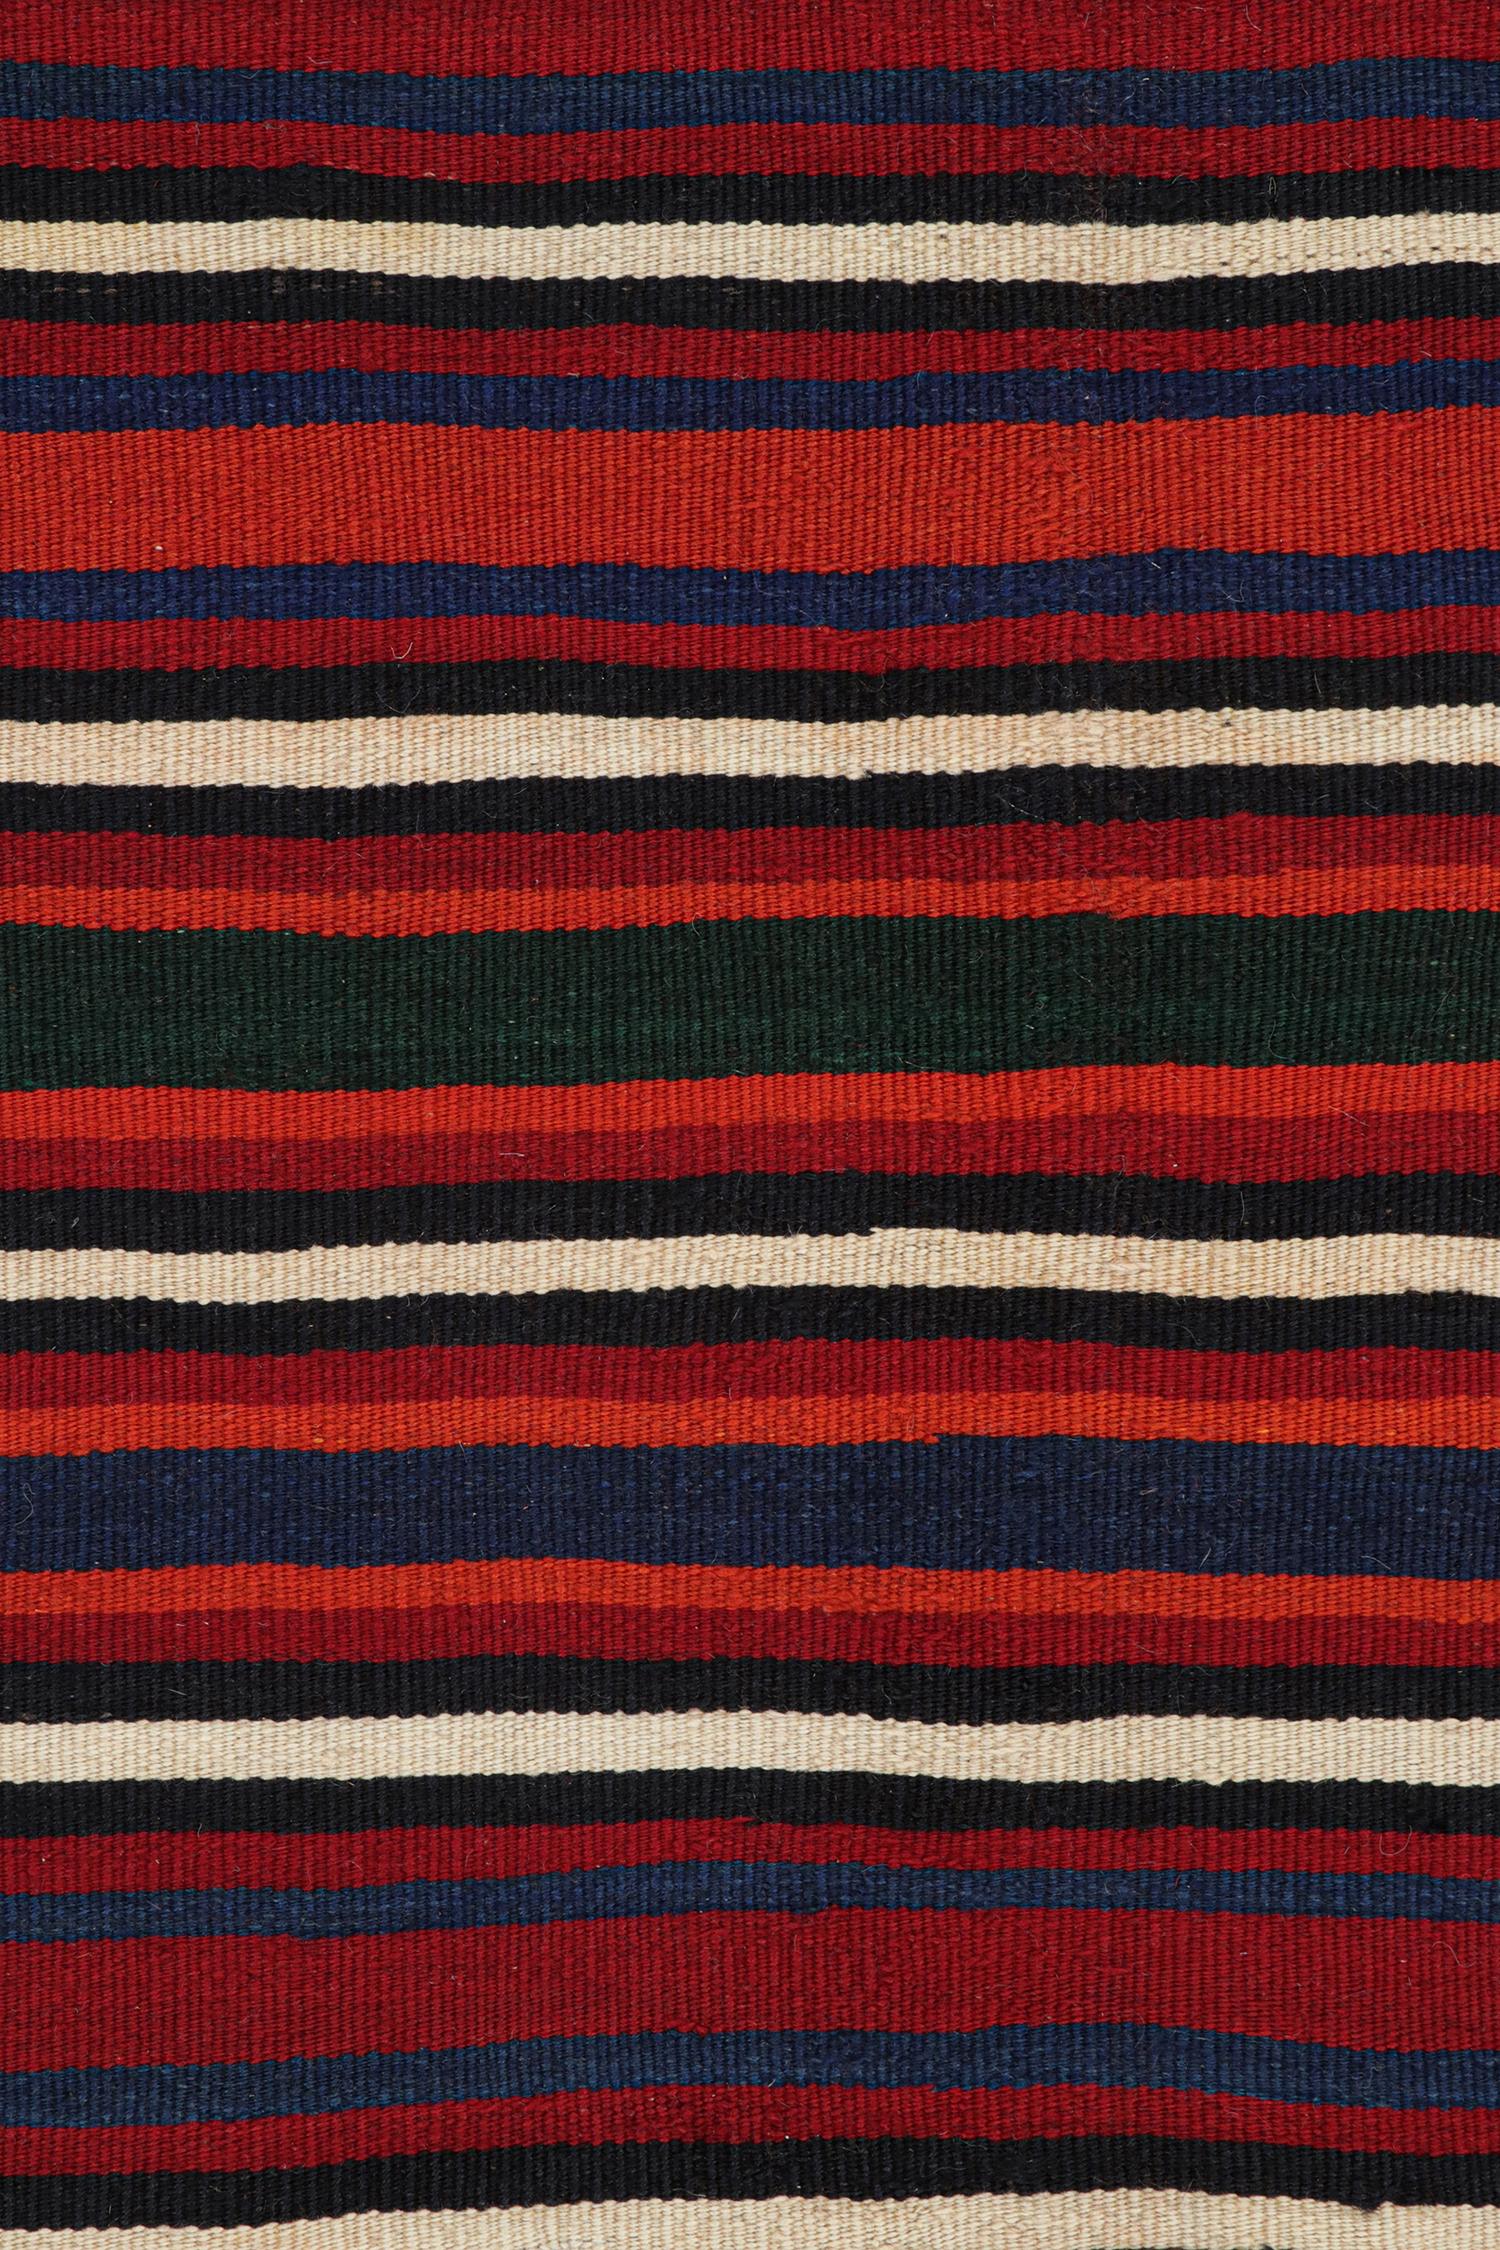 Mid-20th Century Vintage Persian Kilim with Burgundy Red and Navy Blue Stripes For Sale